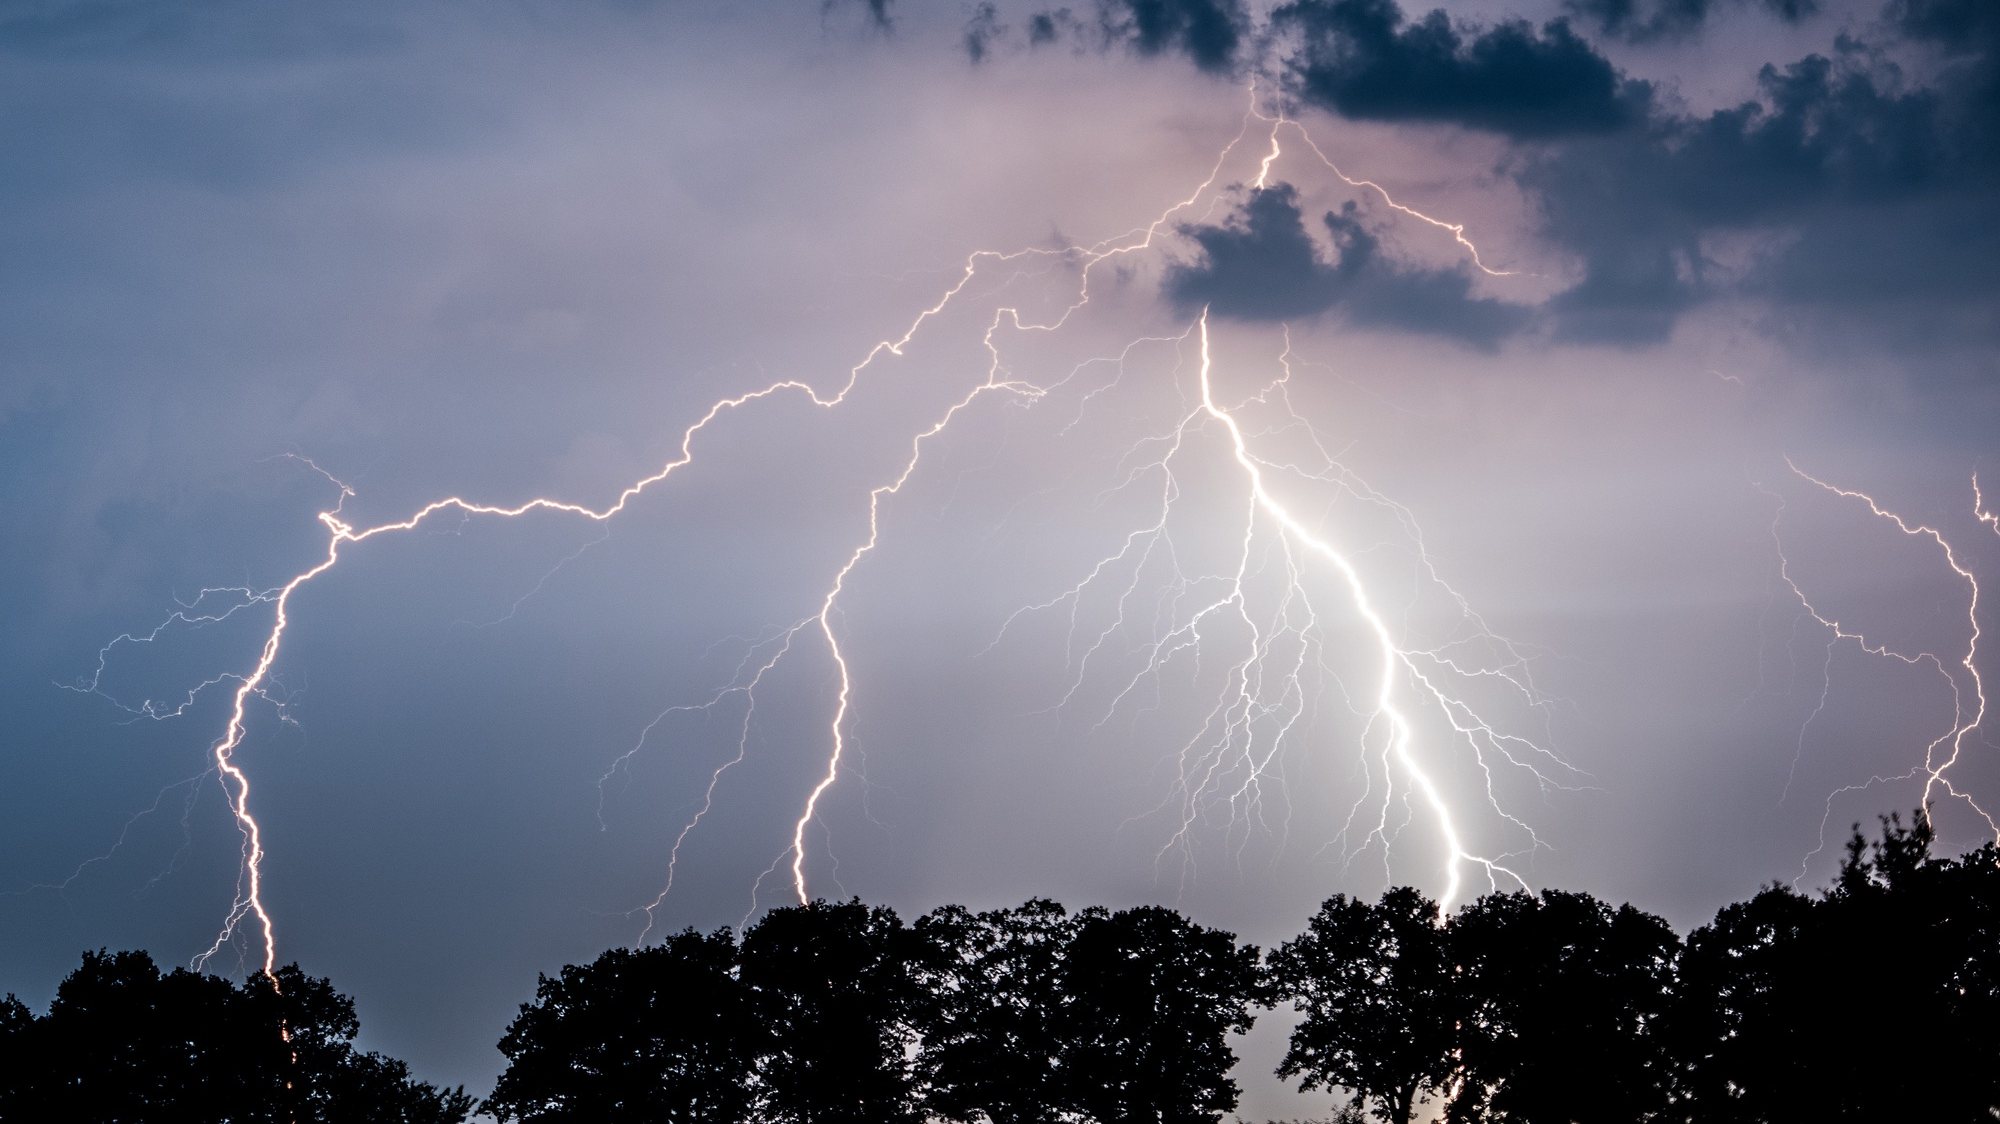 epa07655088 (FILE) Lightning illuminates the nigh sky over Landkreis Oder-Spree in Jacobsdorf, Brandenburg, Germany 01 September 2015 (issued 18 June 2019). German forecasters have issued severe weather warnings for the Corpus Christi bank holiday 20 June 2019 with heavy thunderstorms expected across the country.  EPA/PATRICK PLEUL *** Local Caption *** 52174756